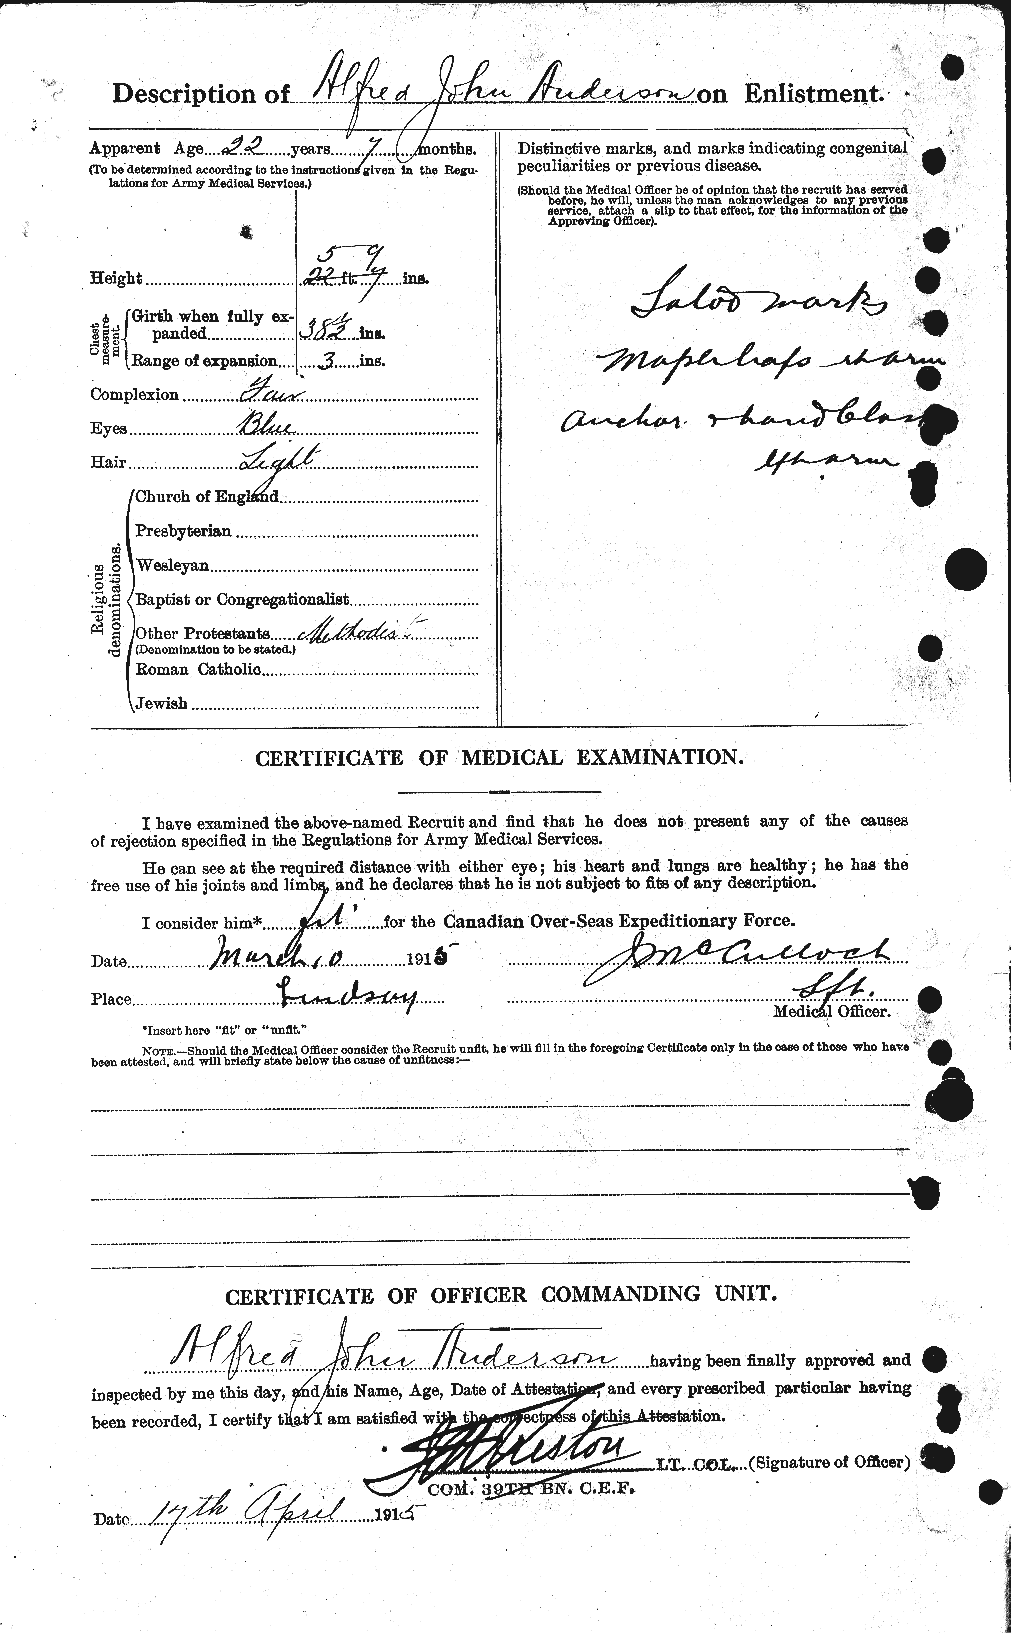 Personnel Records of the First World War - CEF 209453b